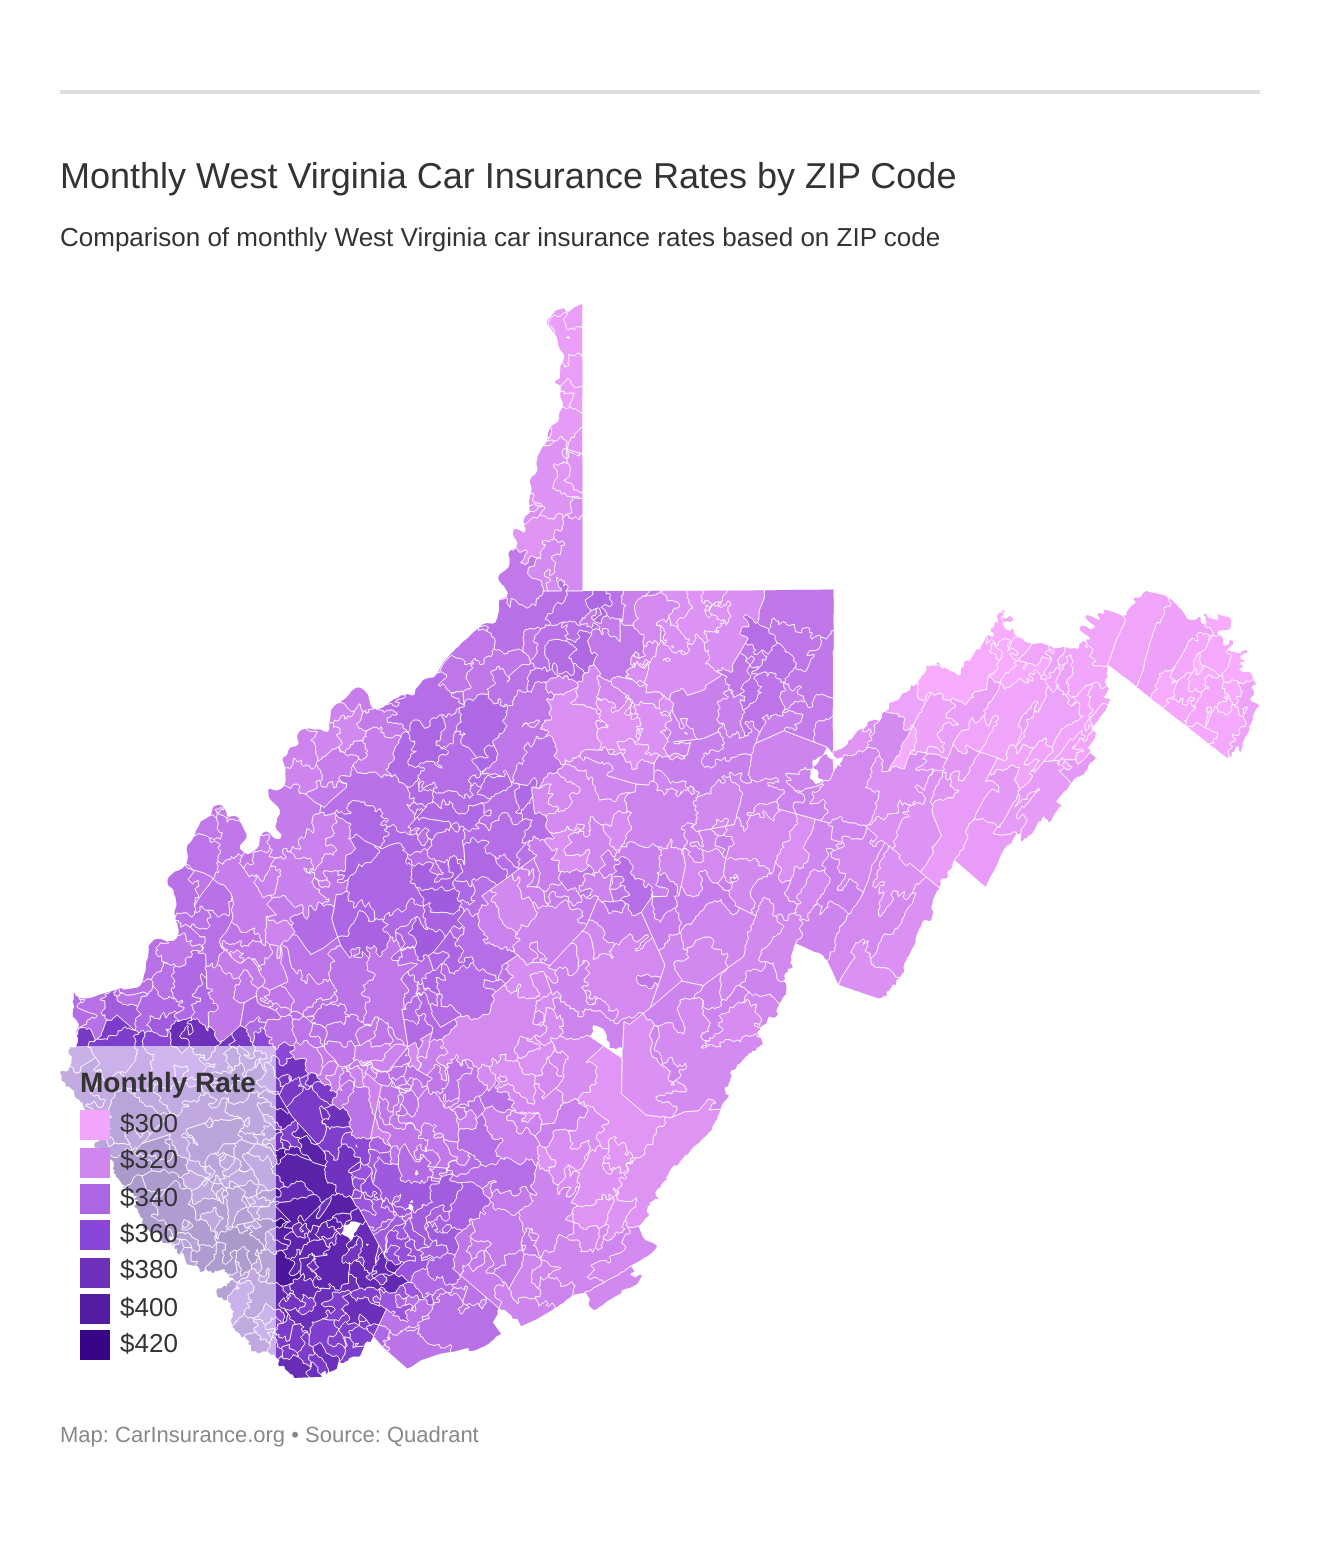 Monthly West Virginia Car Insurance Rates by ZIP Code